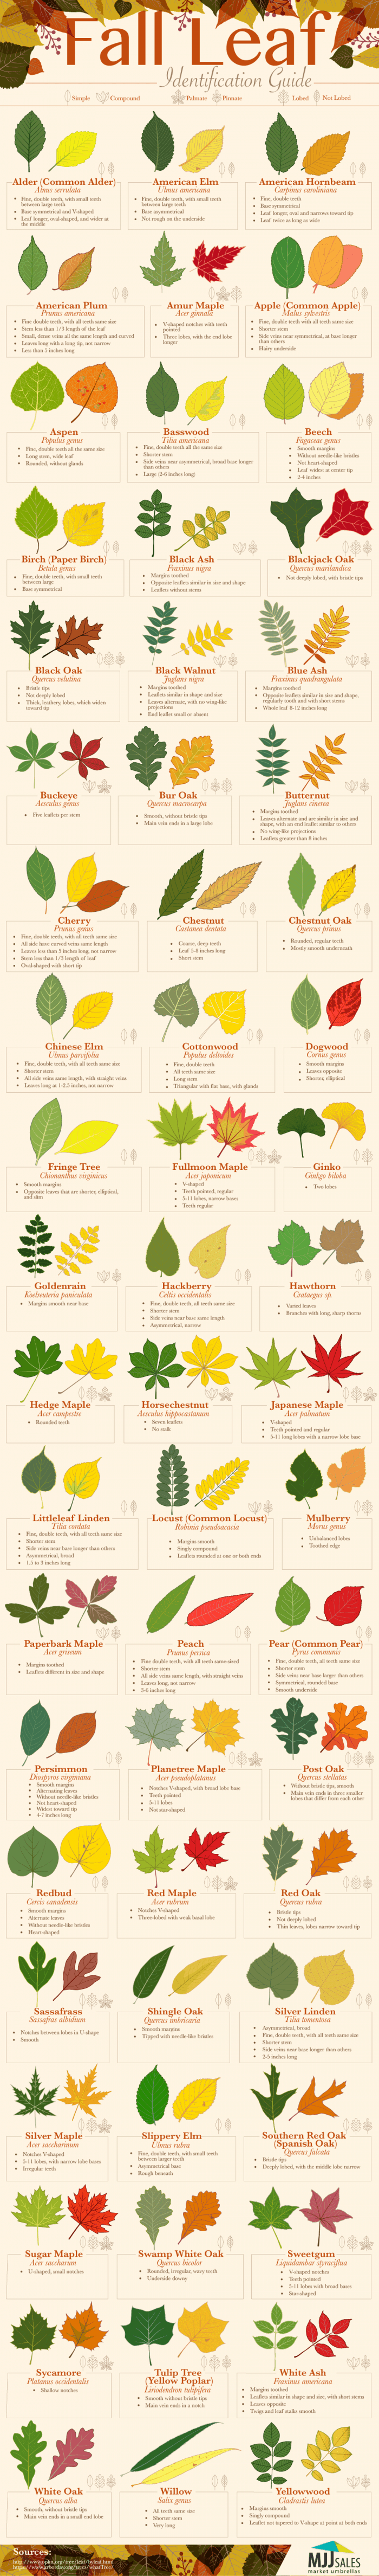 A guide to identifying fall leaves